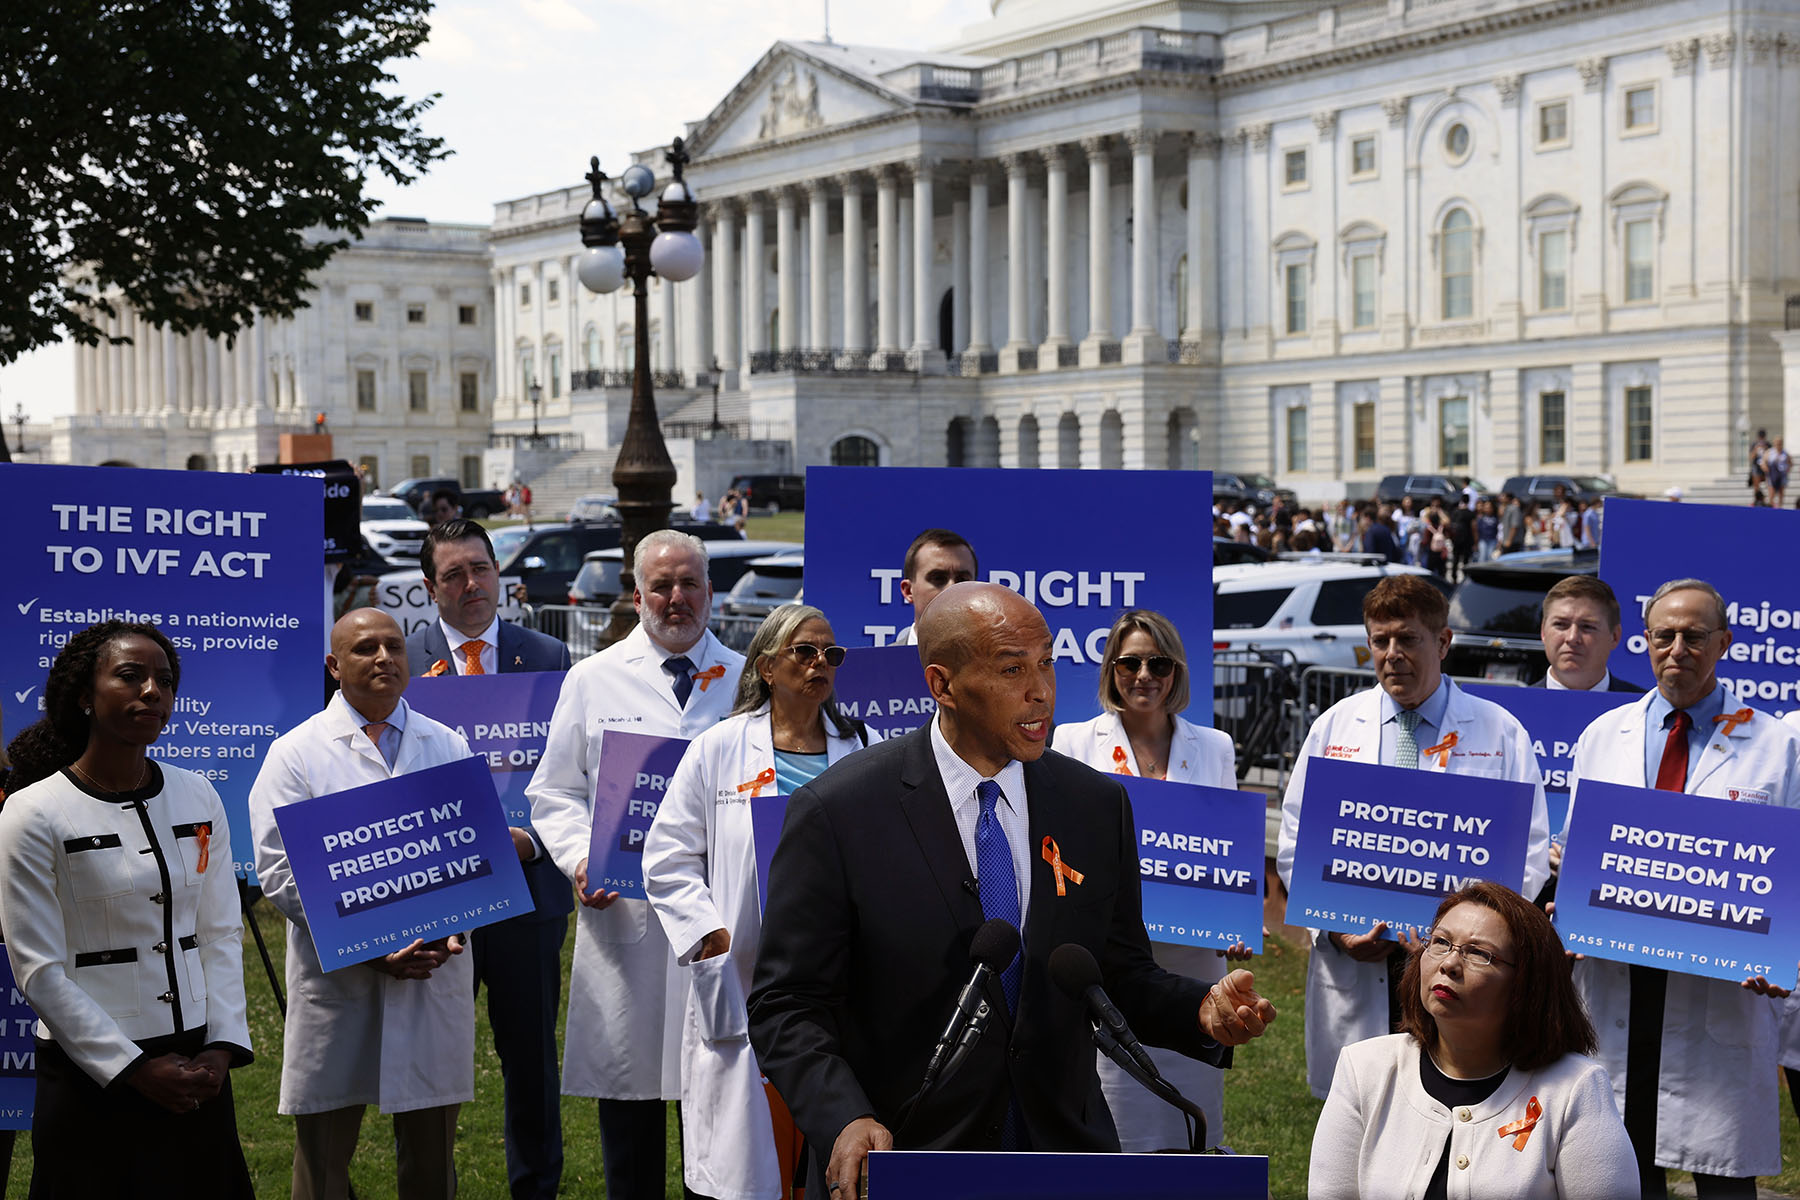 Sen. Cory Booker speaks during a news conference on access to IVF treatments outside of the Capitol Building. He is surrounded by doctors holding signs that read "protect my freedom to provide IVF" and flanked by Sen. Tammy Duckworth